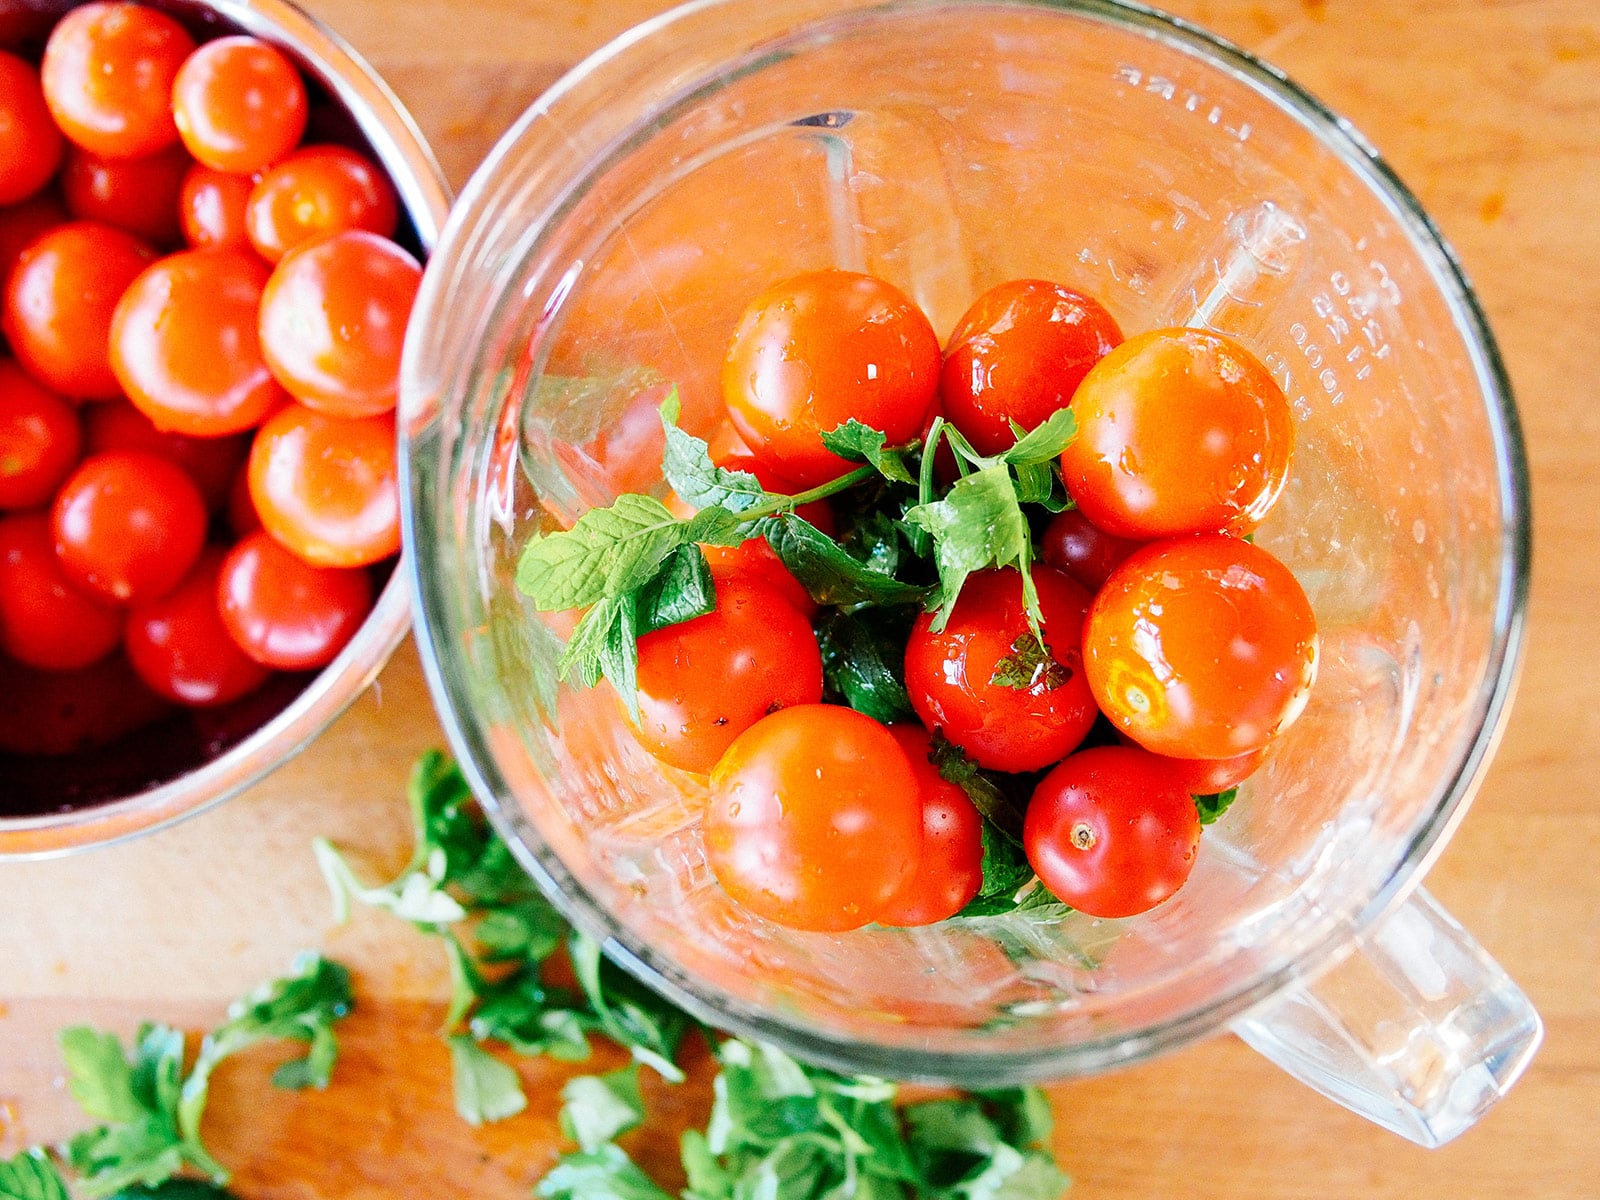 Add tomatoes, parsley, mint, garlic, and olive oil to a blender